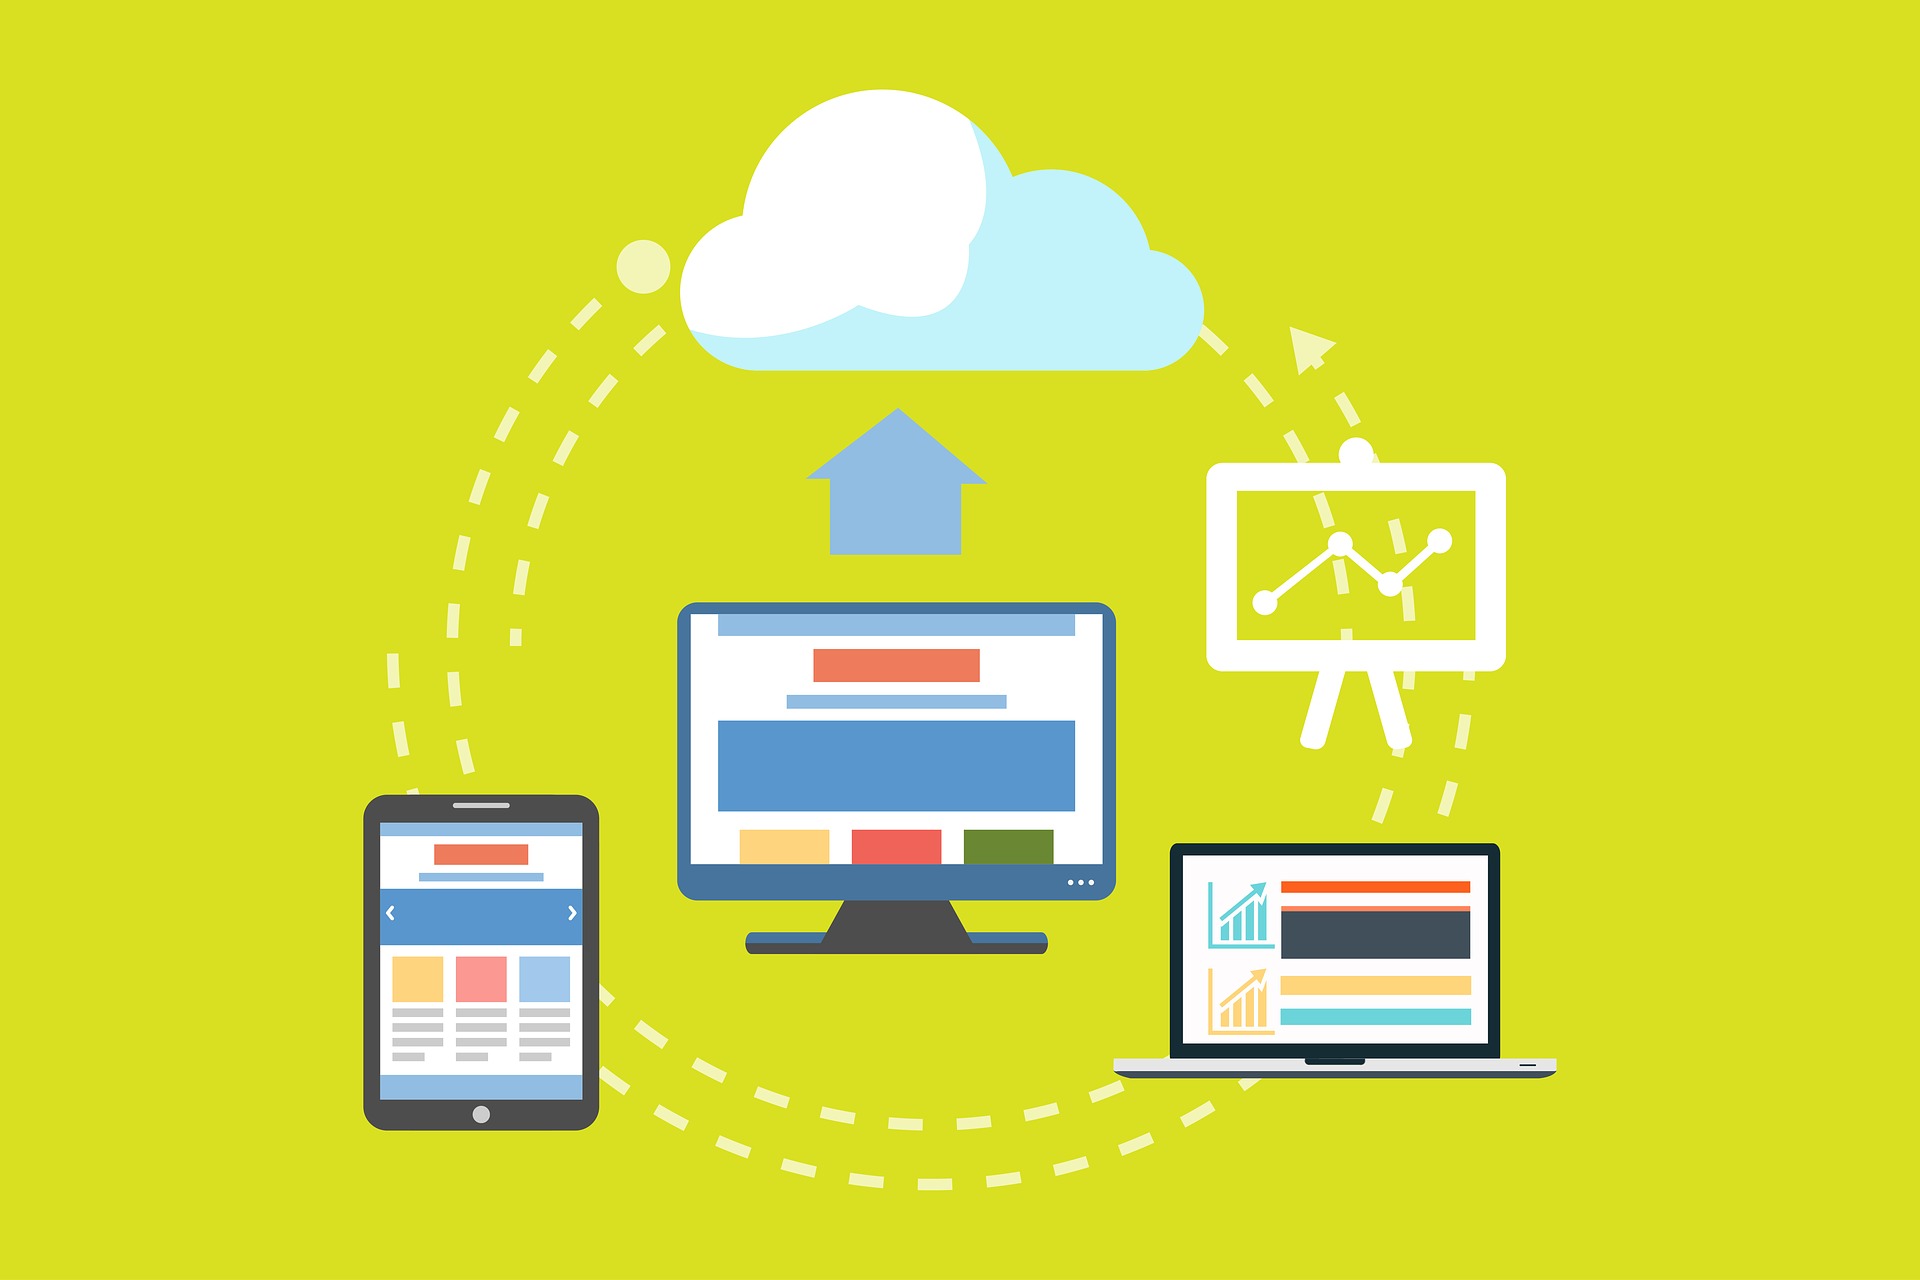 Illustration of cloud computing with a cloud icon at the center, connected to a smartphone, desktop computer, laptop, and a presentation screen.